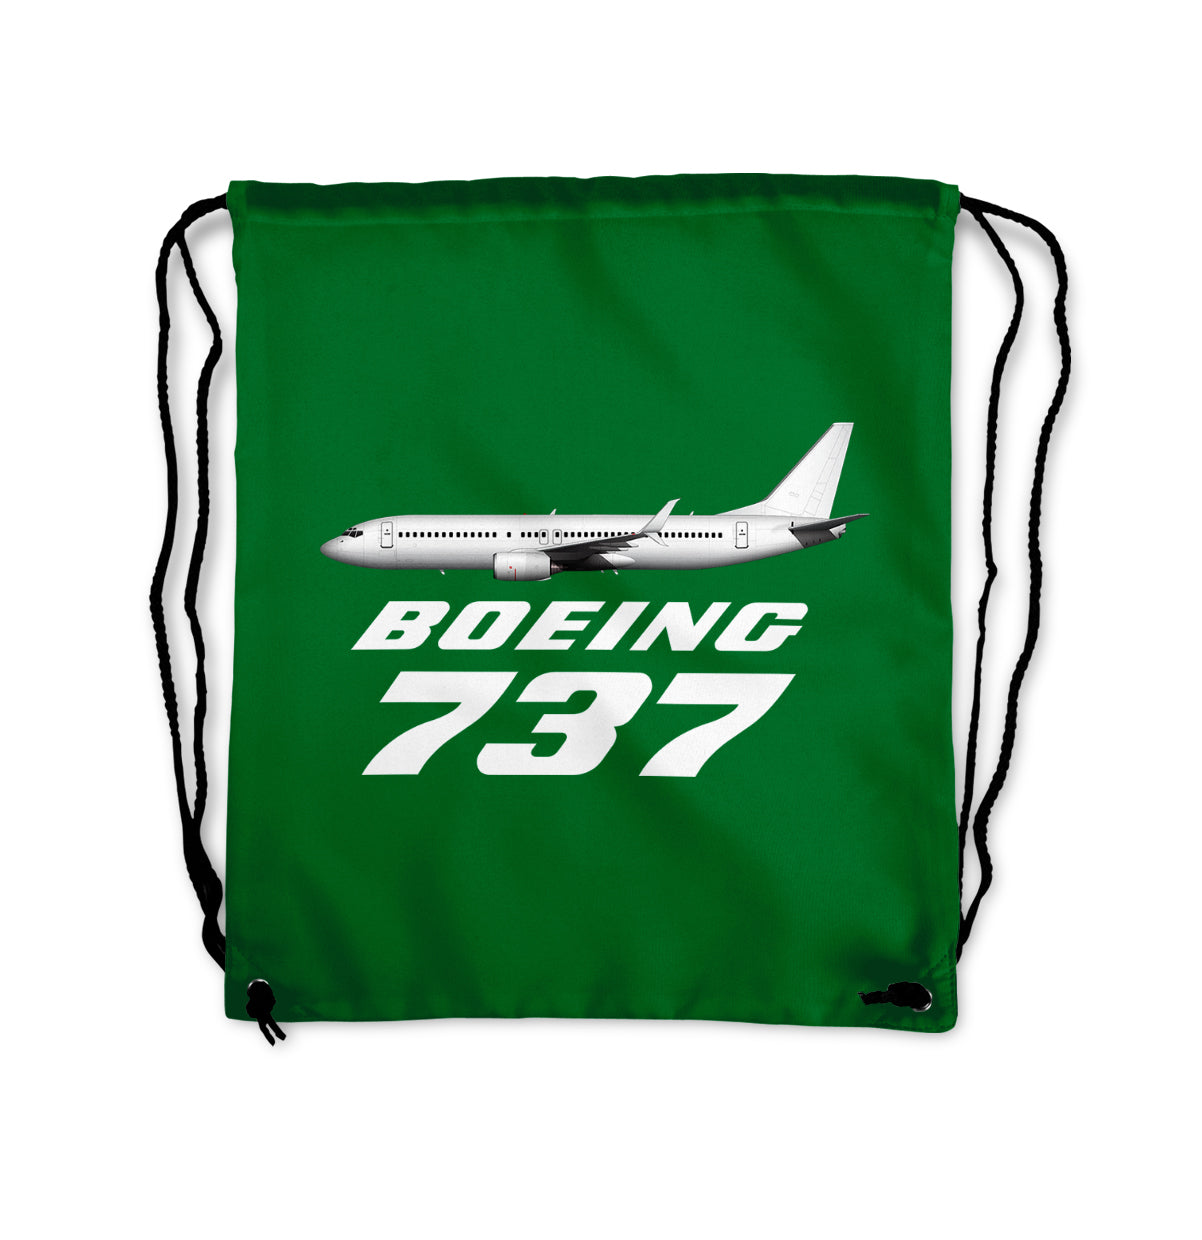 The Boeing 737 Designed Drawstring Bags